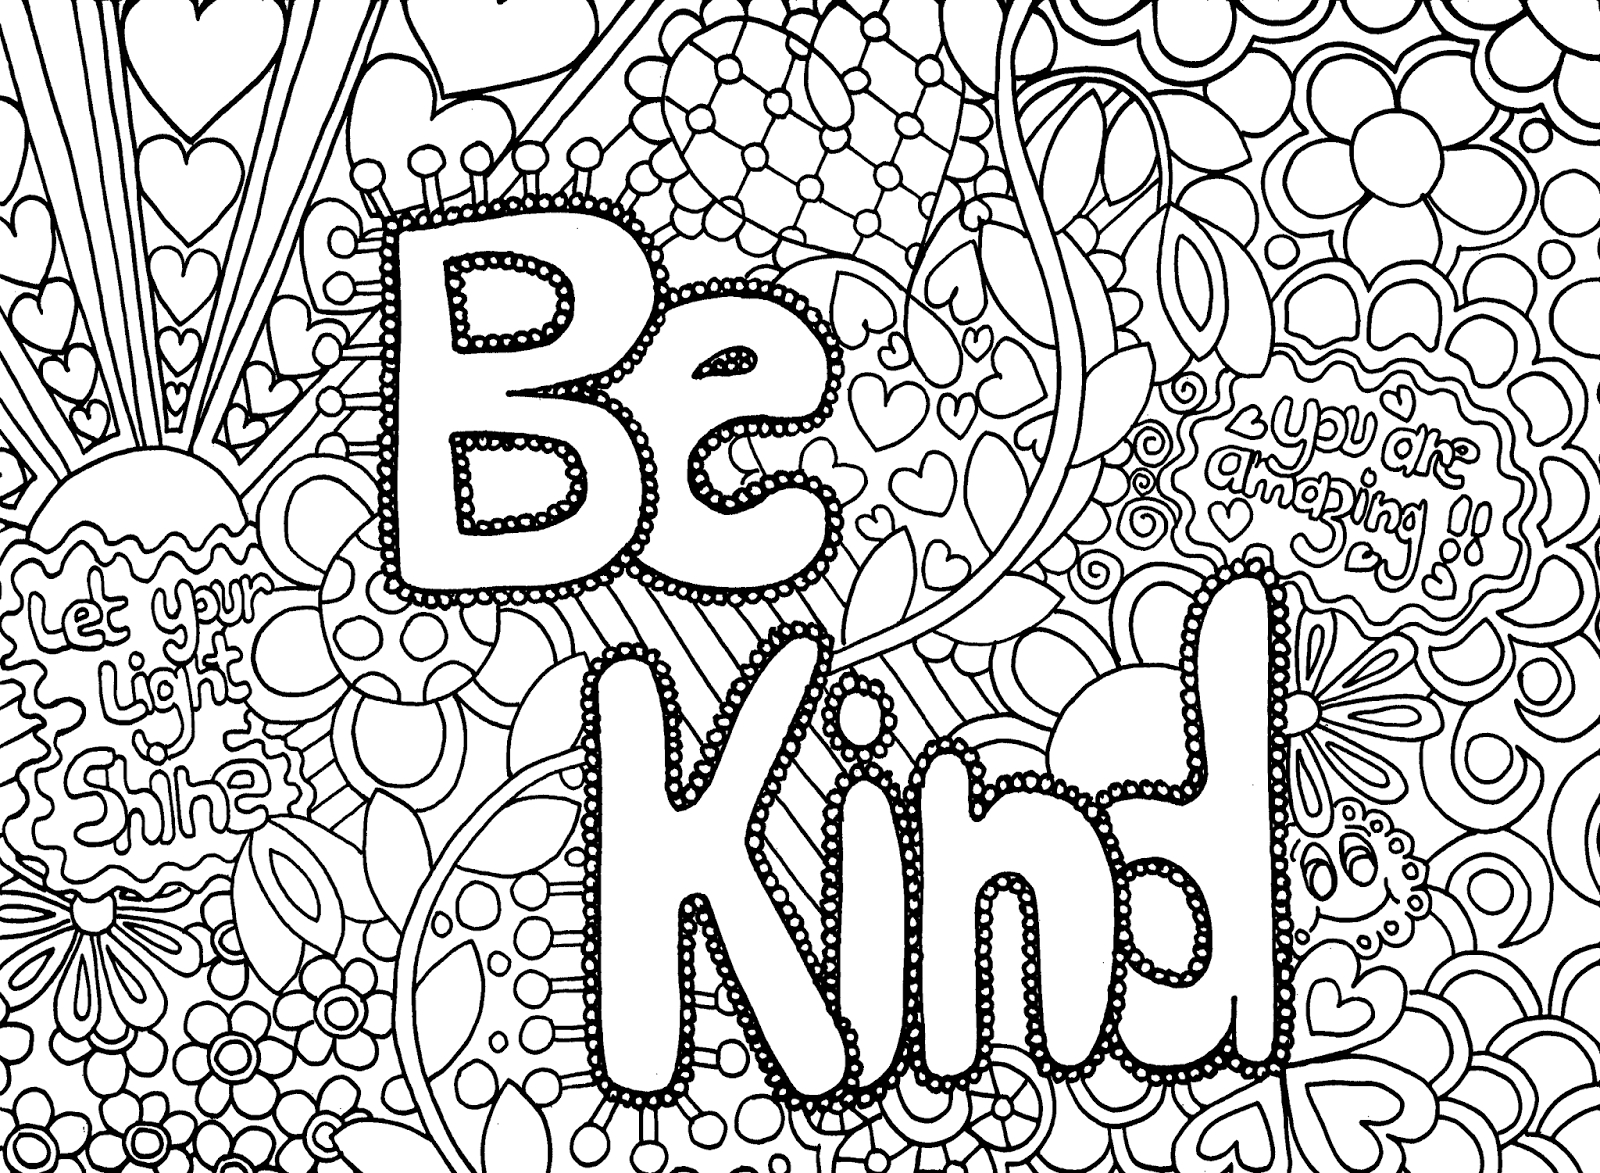 For The Last Few Years Kid&amp;#039;s Coloring Pages Printed From The - Free Printable Coloring Pages On Respect